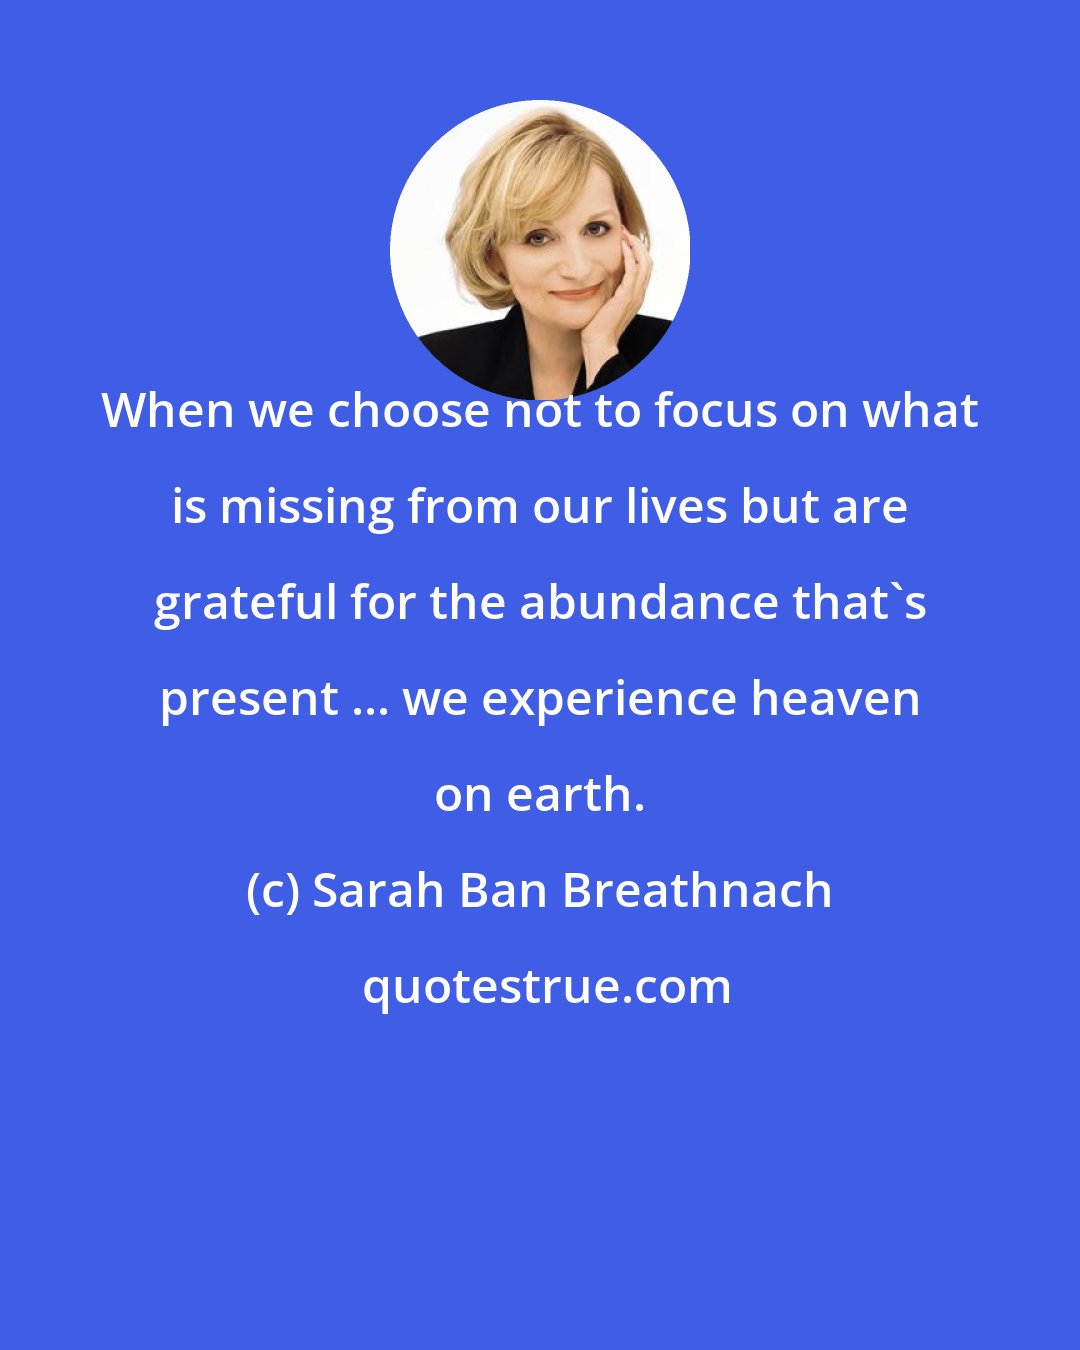 Sarah Ban Breathnach: When we choose not to focus on what is missing from our lives but are grateful for the abundance that's present ... we experience heaven on earth.